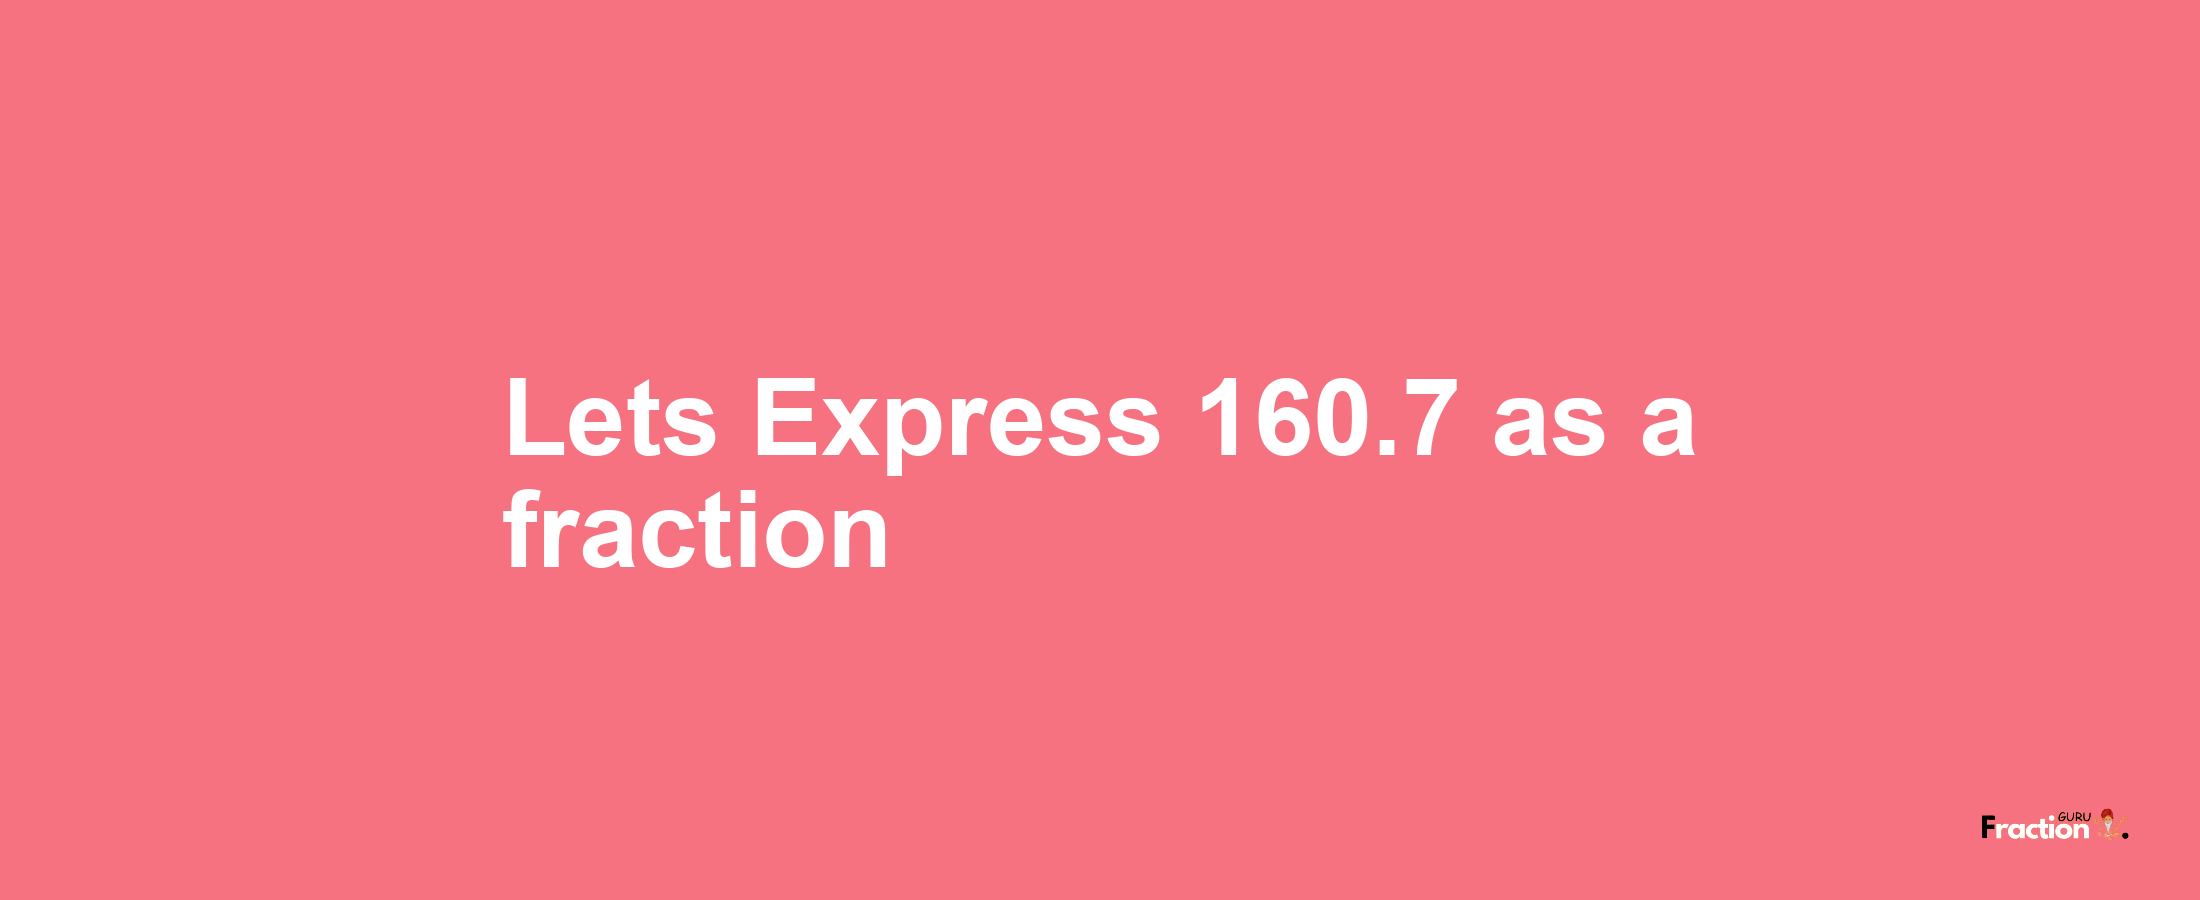 Lets Express 160.7 as afraction